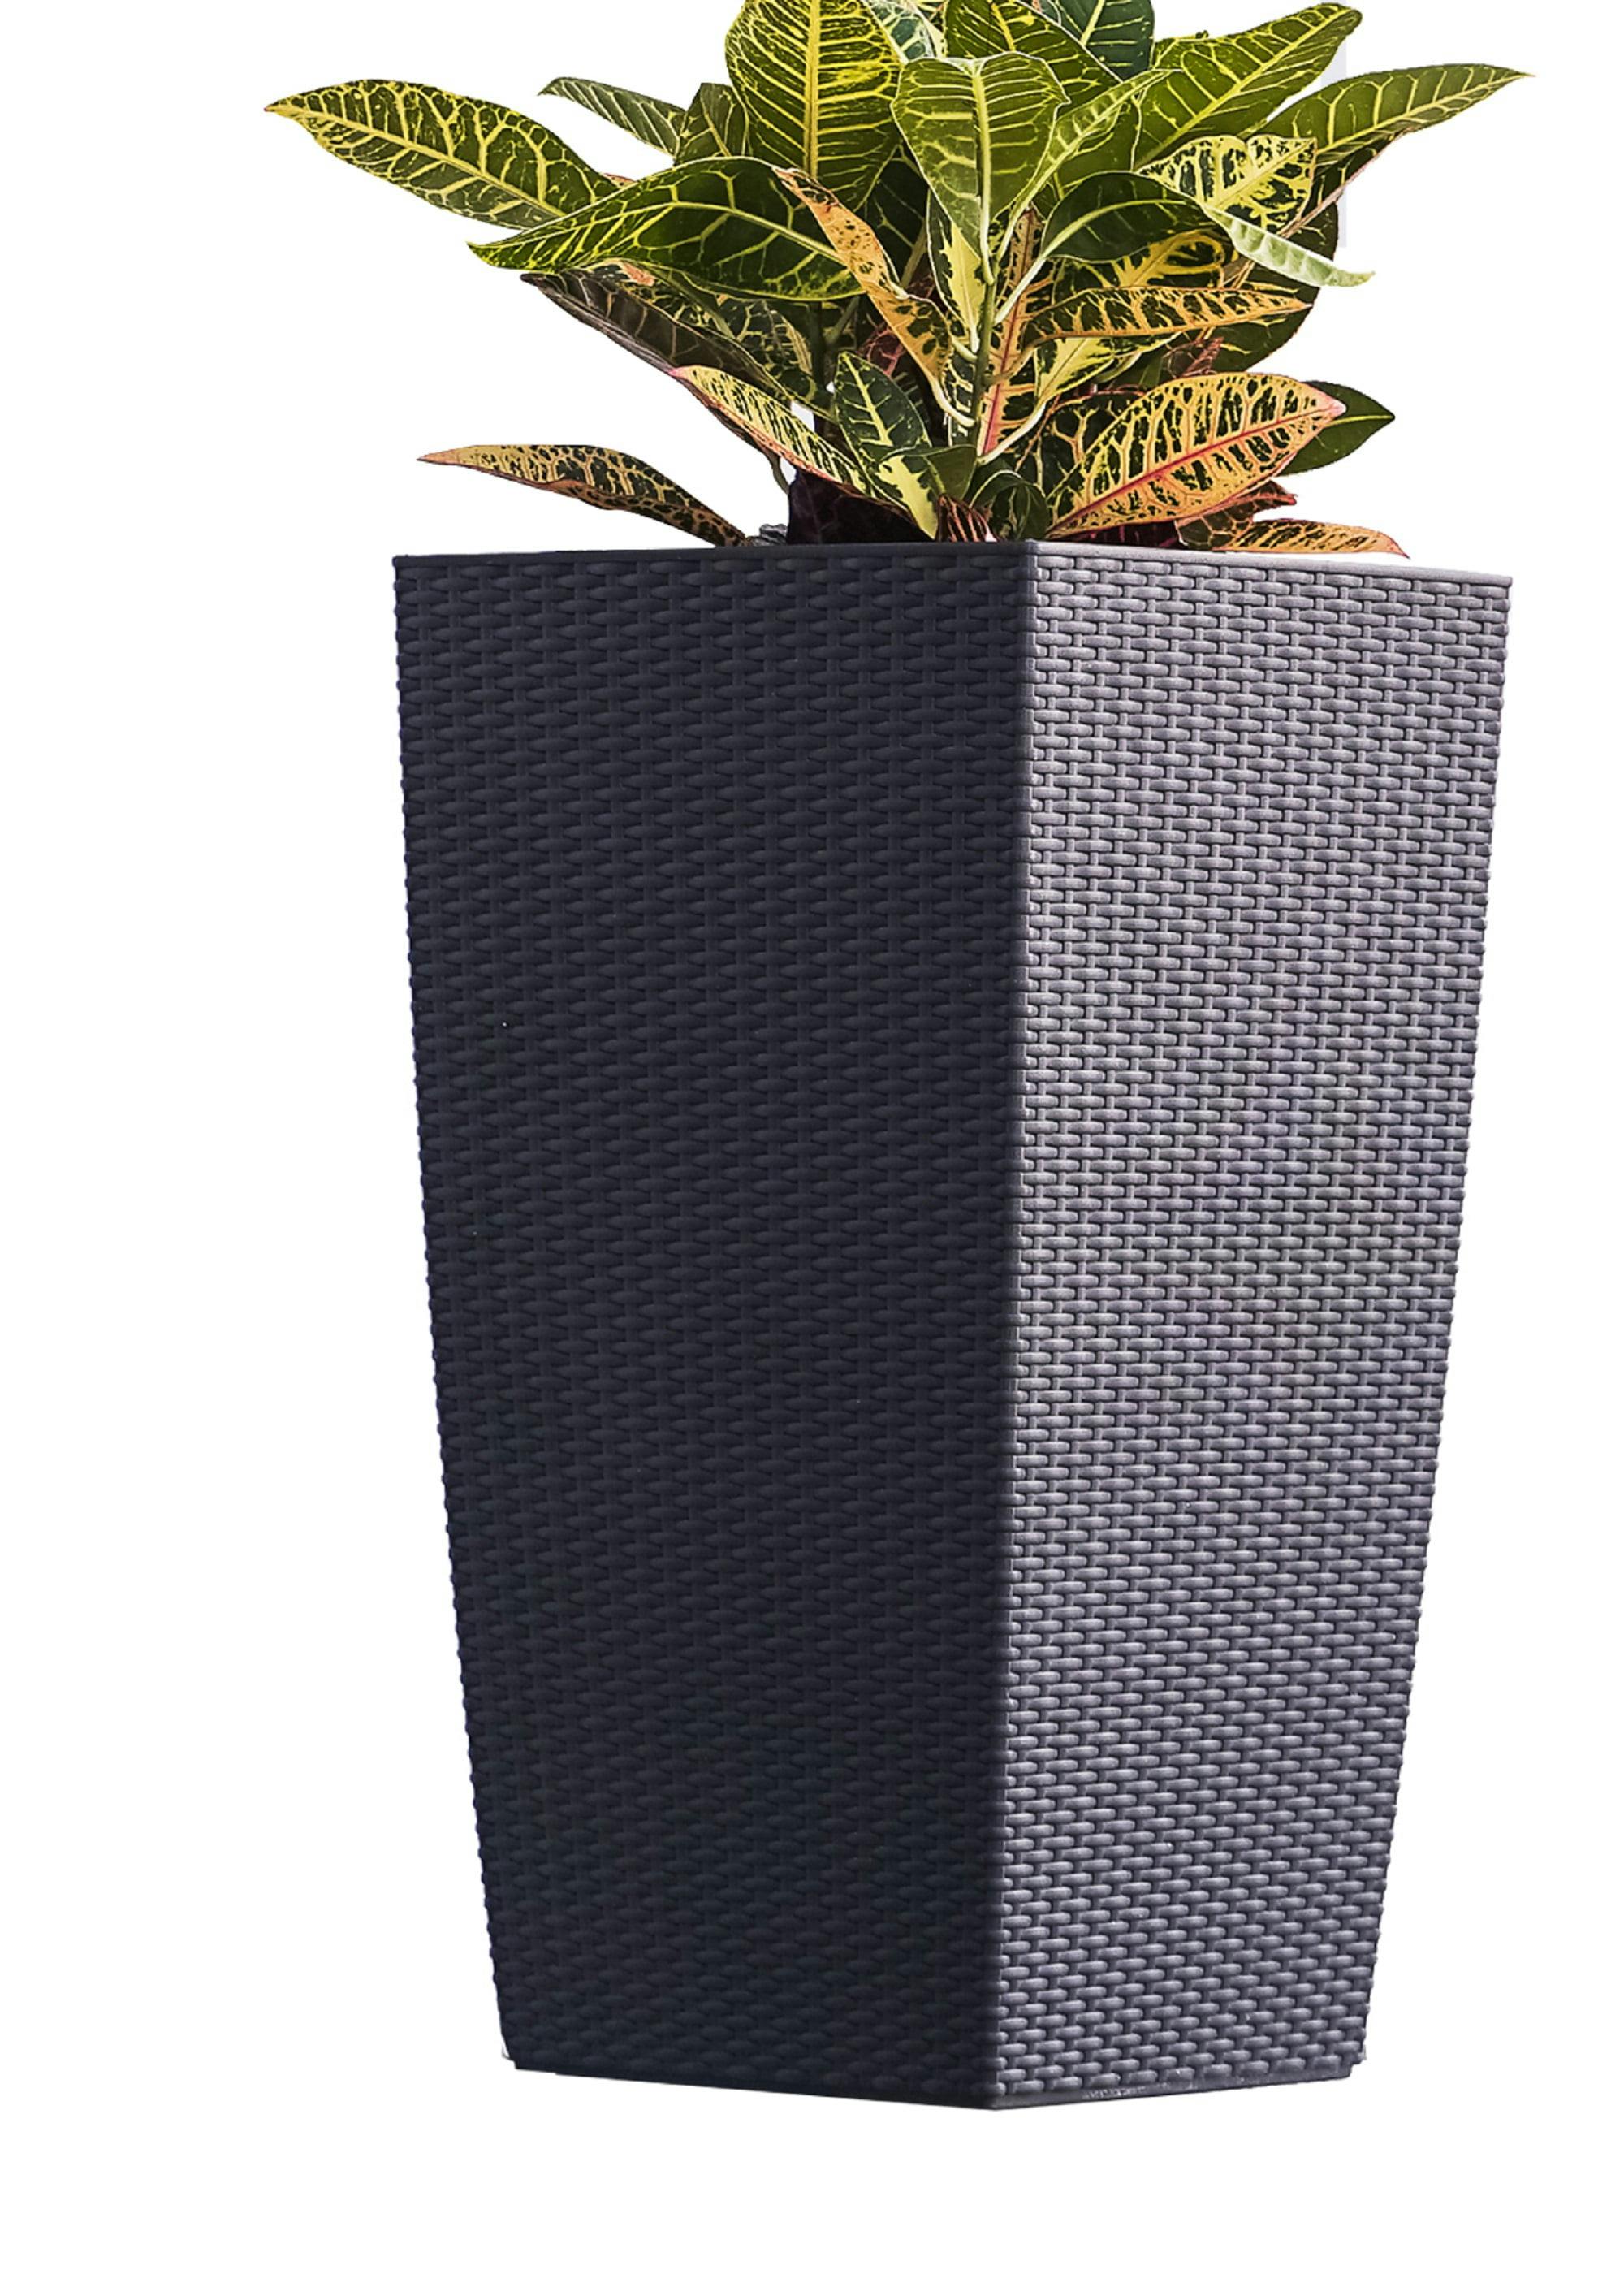 XBrand 30" Black Rattan Self-Watering Square Planter for Indoors & Outdoors